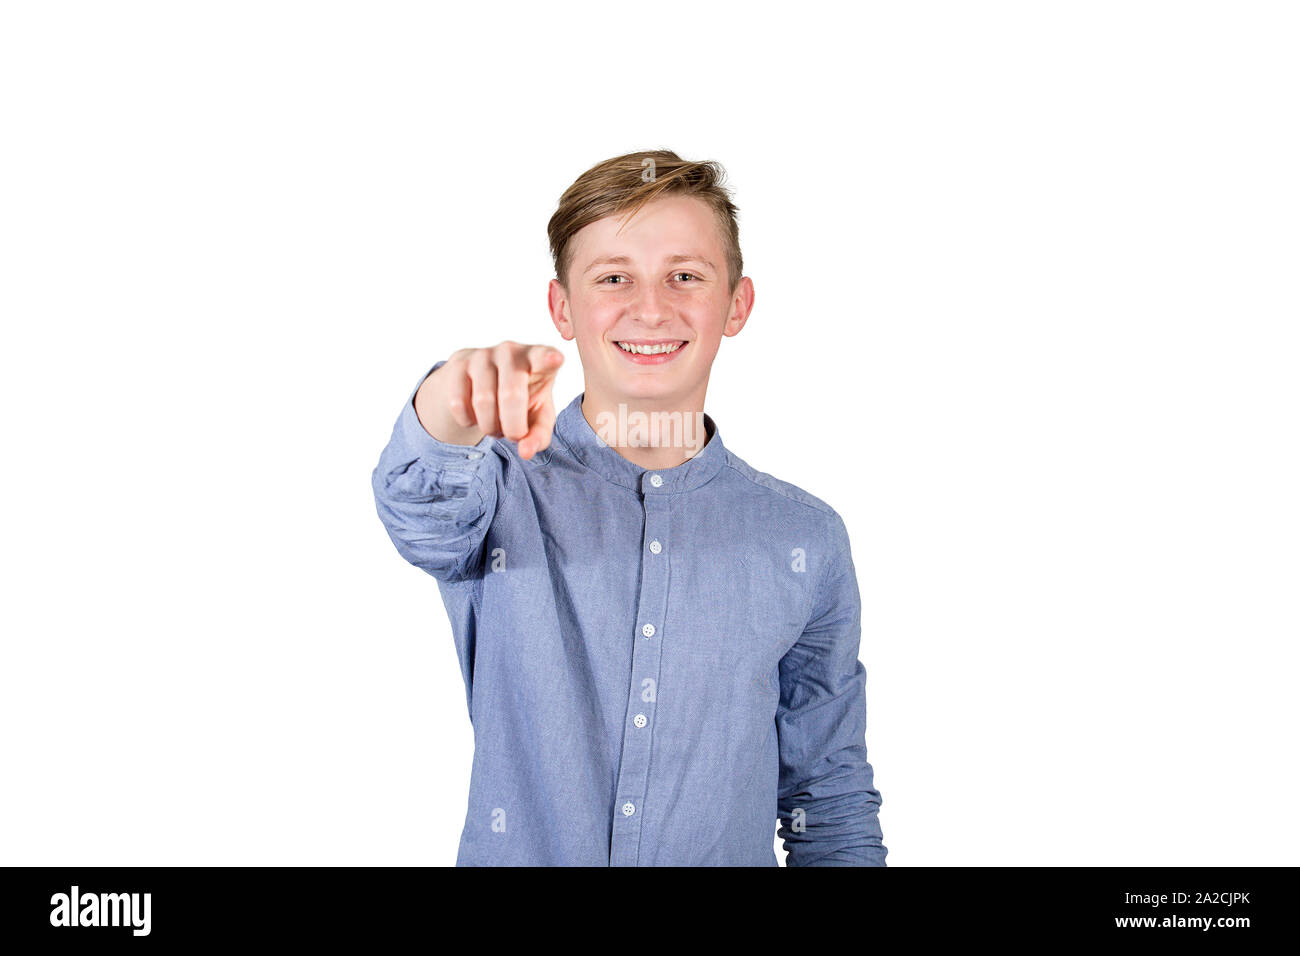 Joyful guy teenager pointing index finger looking to camera tooth smile isolated over white background. I choose you. Stock Photo